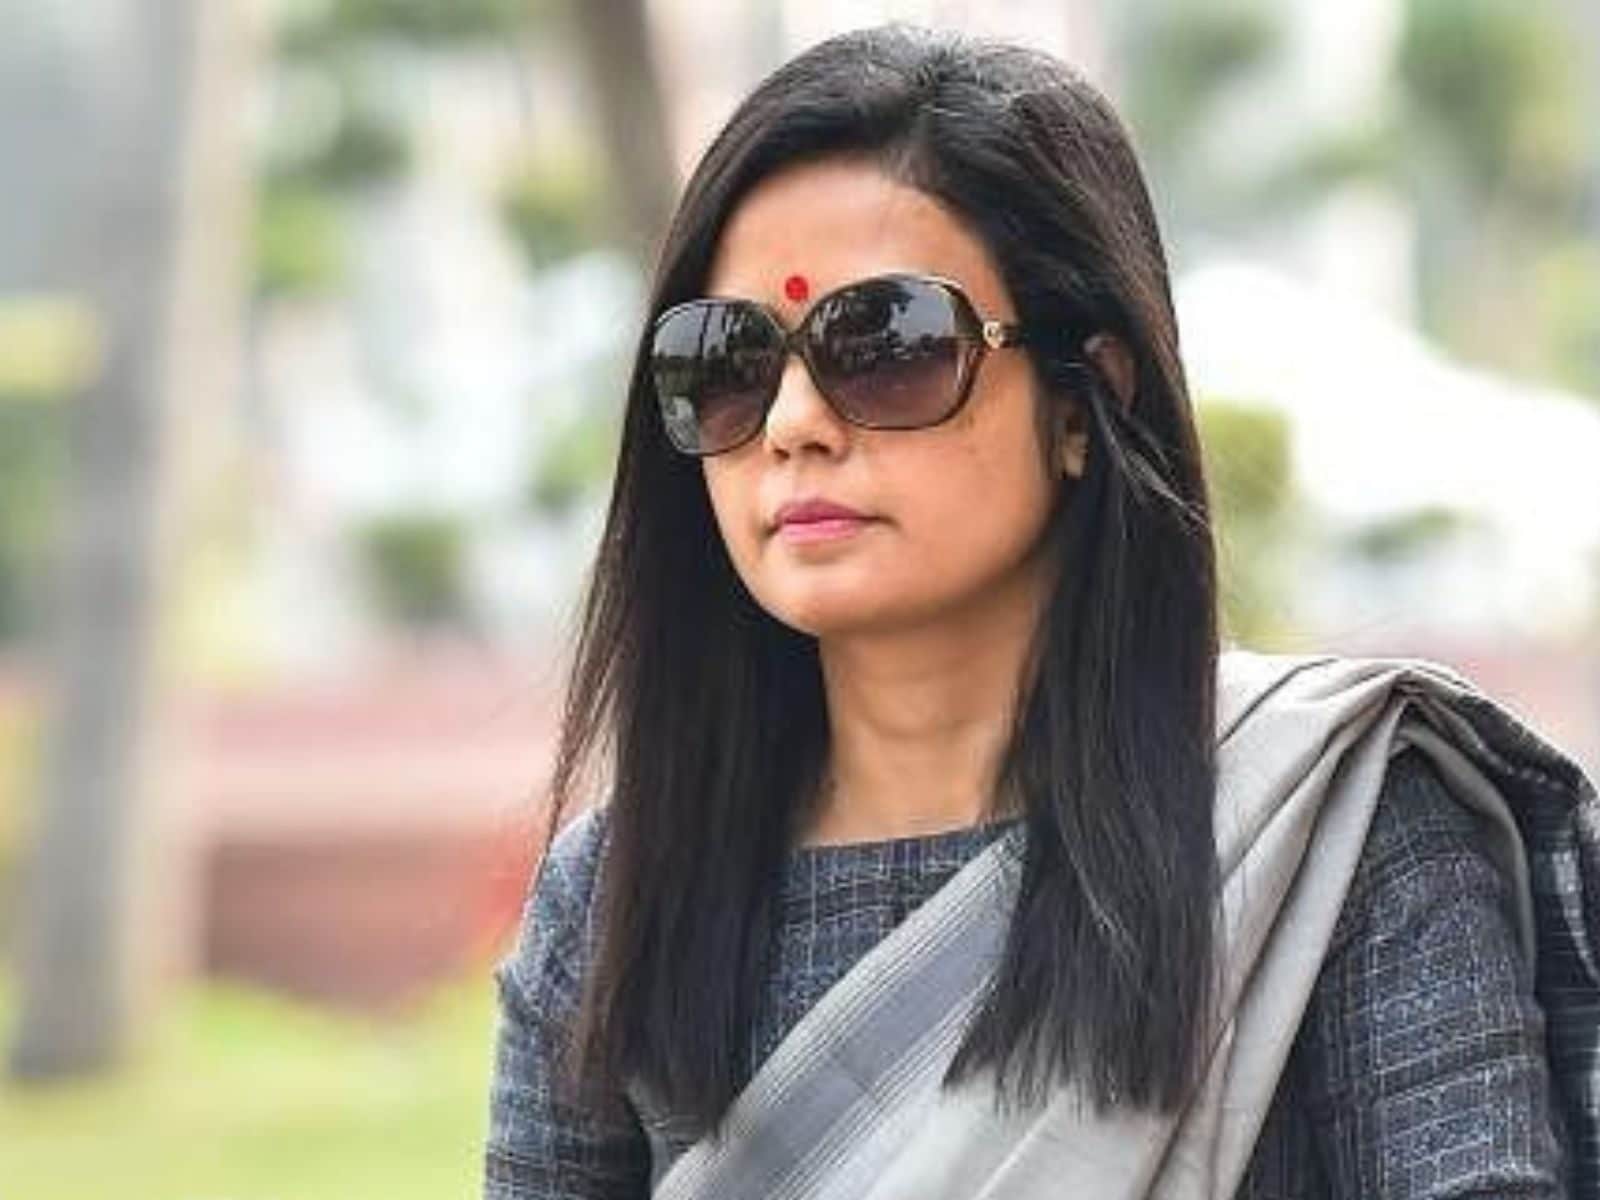 Can't even buy trousers for dad without giving phone number: TMC MP Mahua  Moitra posts complaint against Decathlon